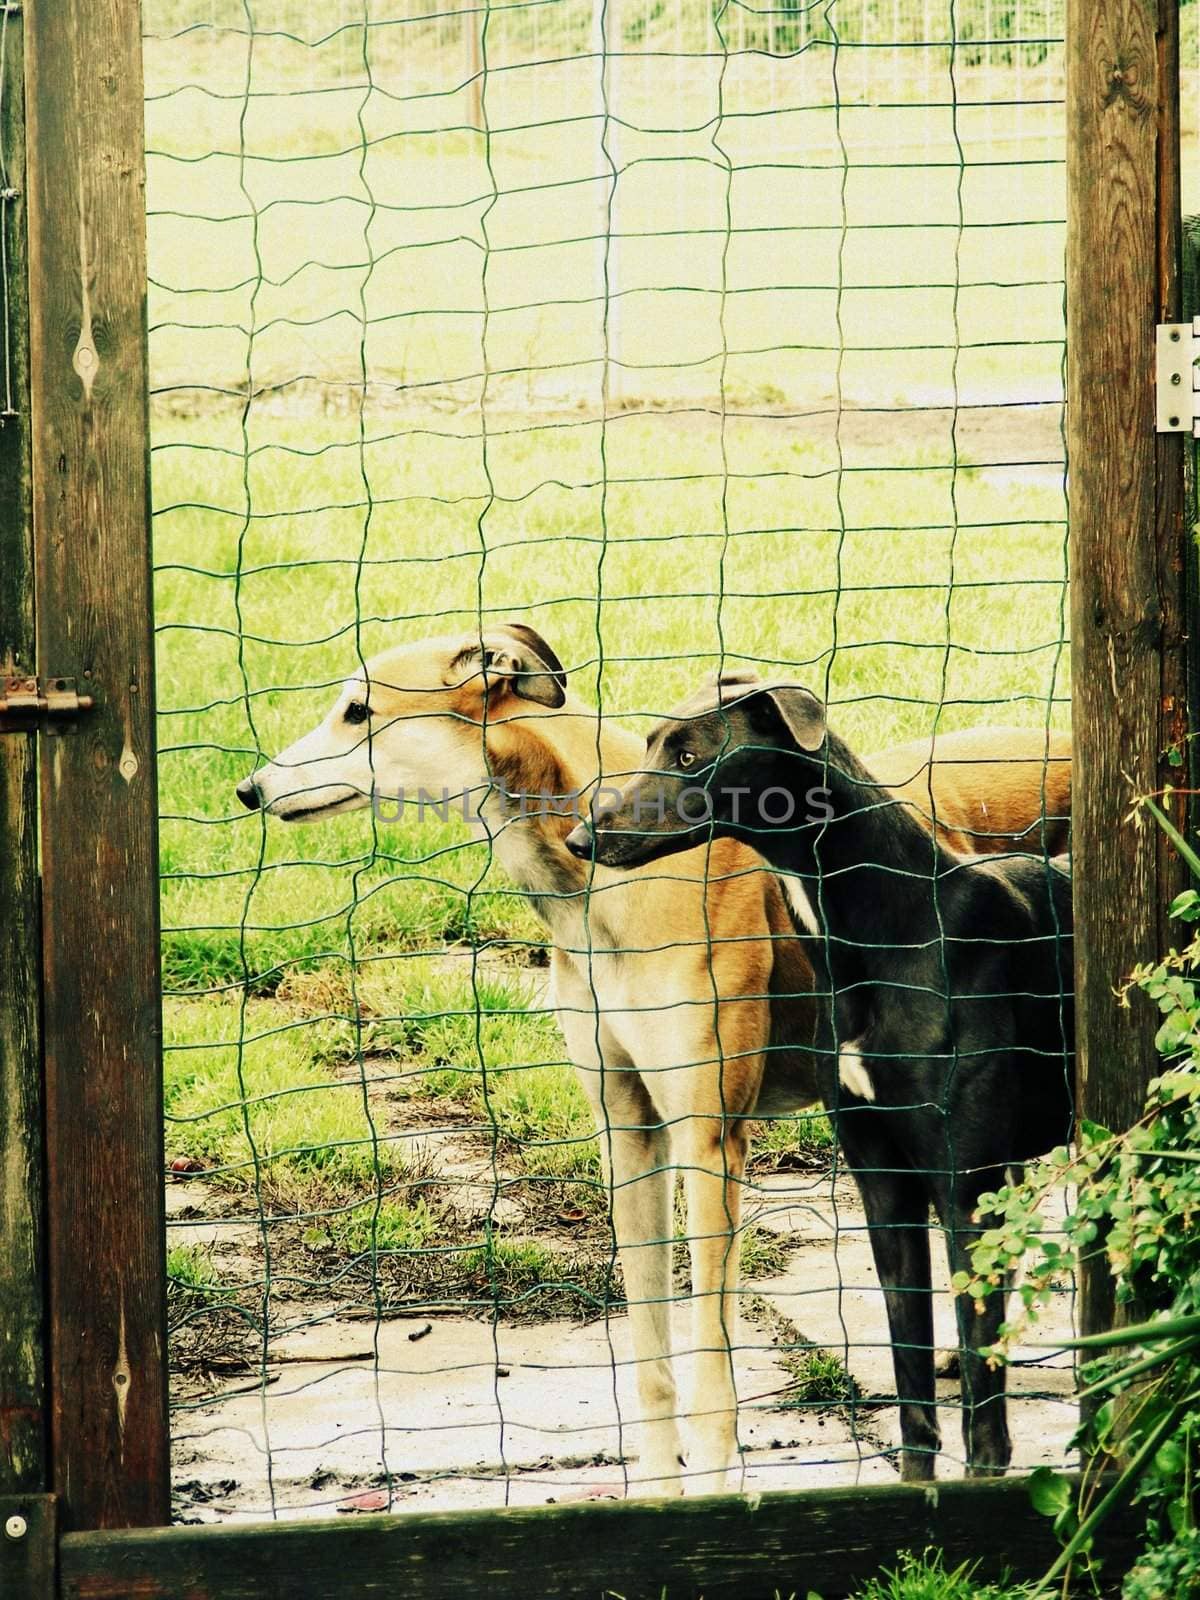 A photograph of two caged pound stray dogs.